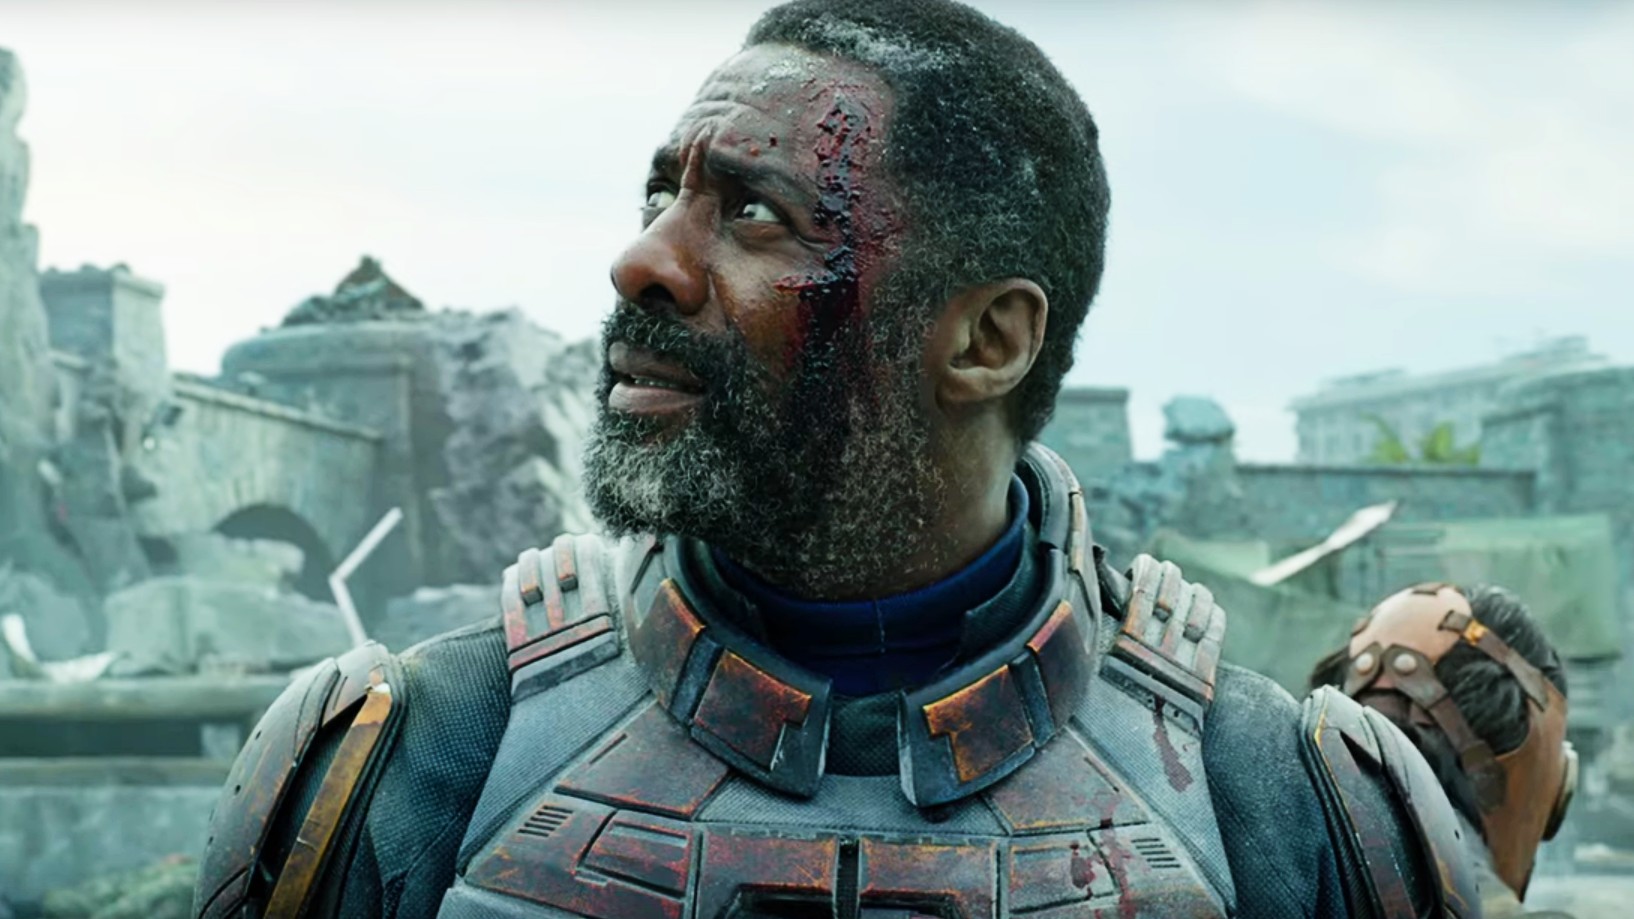 Idris Elba Looks Awesome In First Look At New Action Series